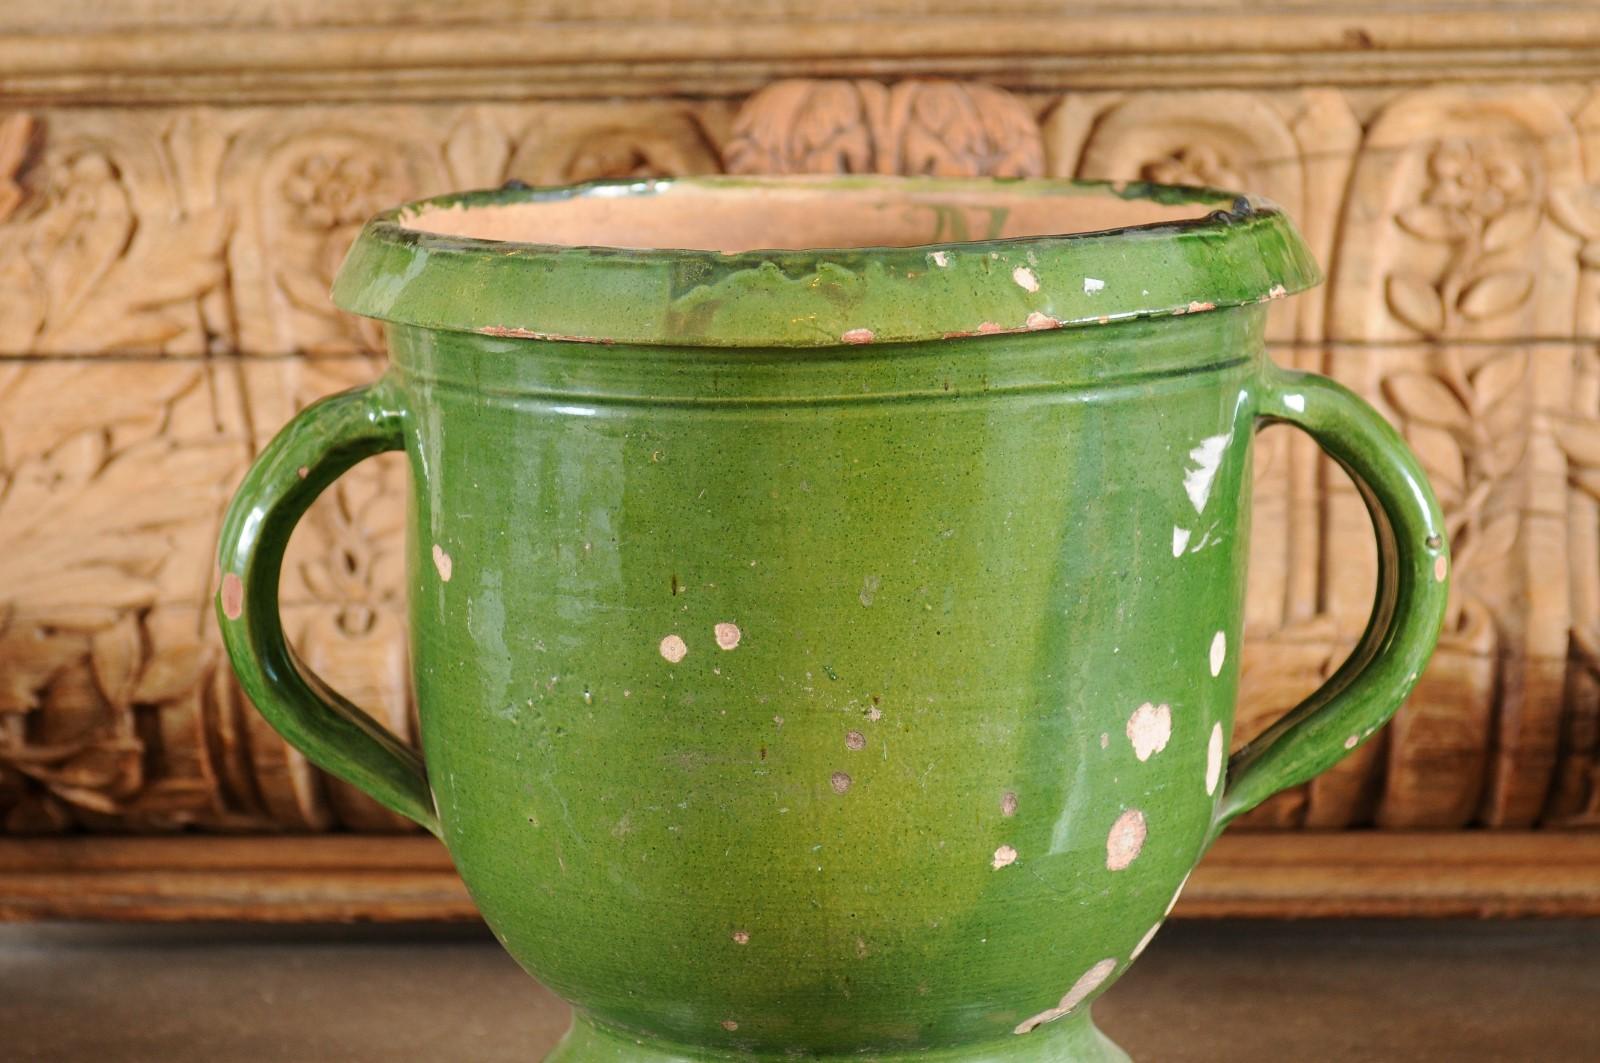 19th Century French Provincial 1850s Green Glazed Pottery Jardinière with Distressed Patina